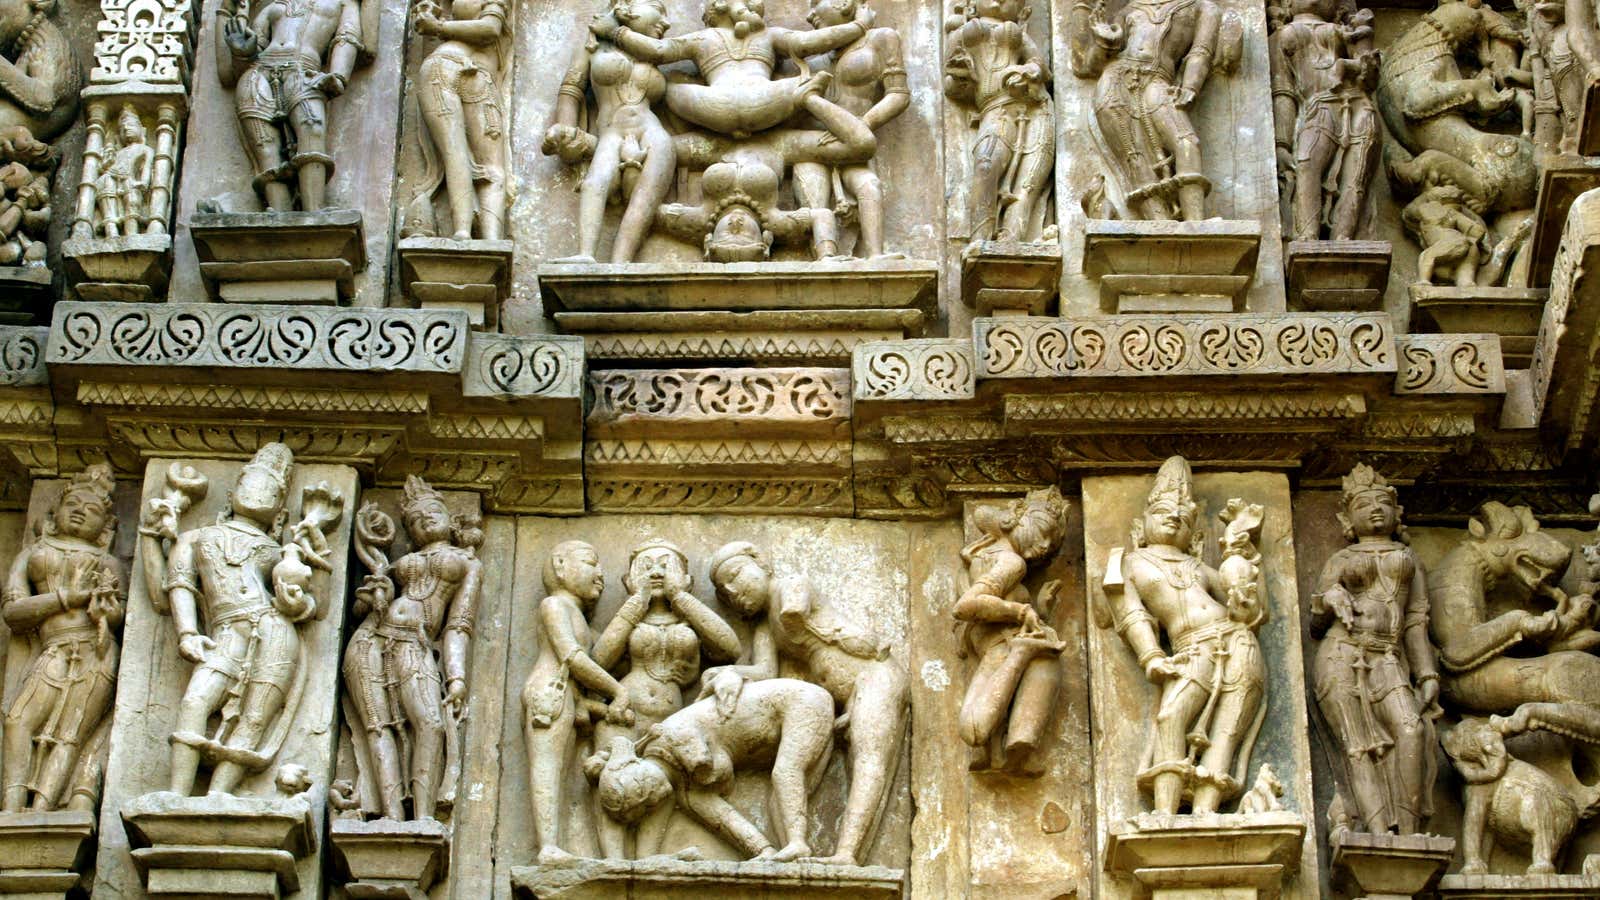 How Kamasutra was first published in English against norms